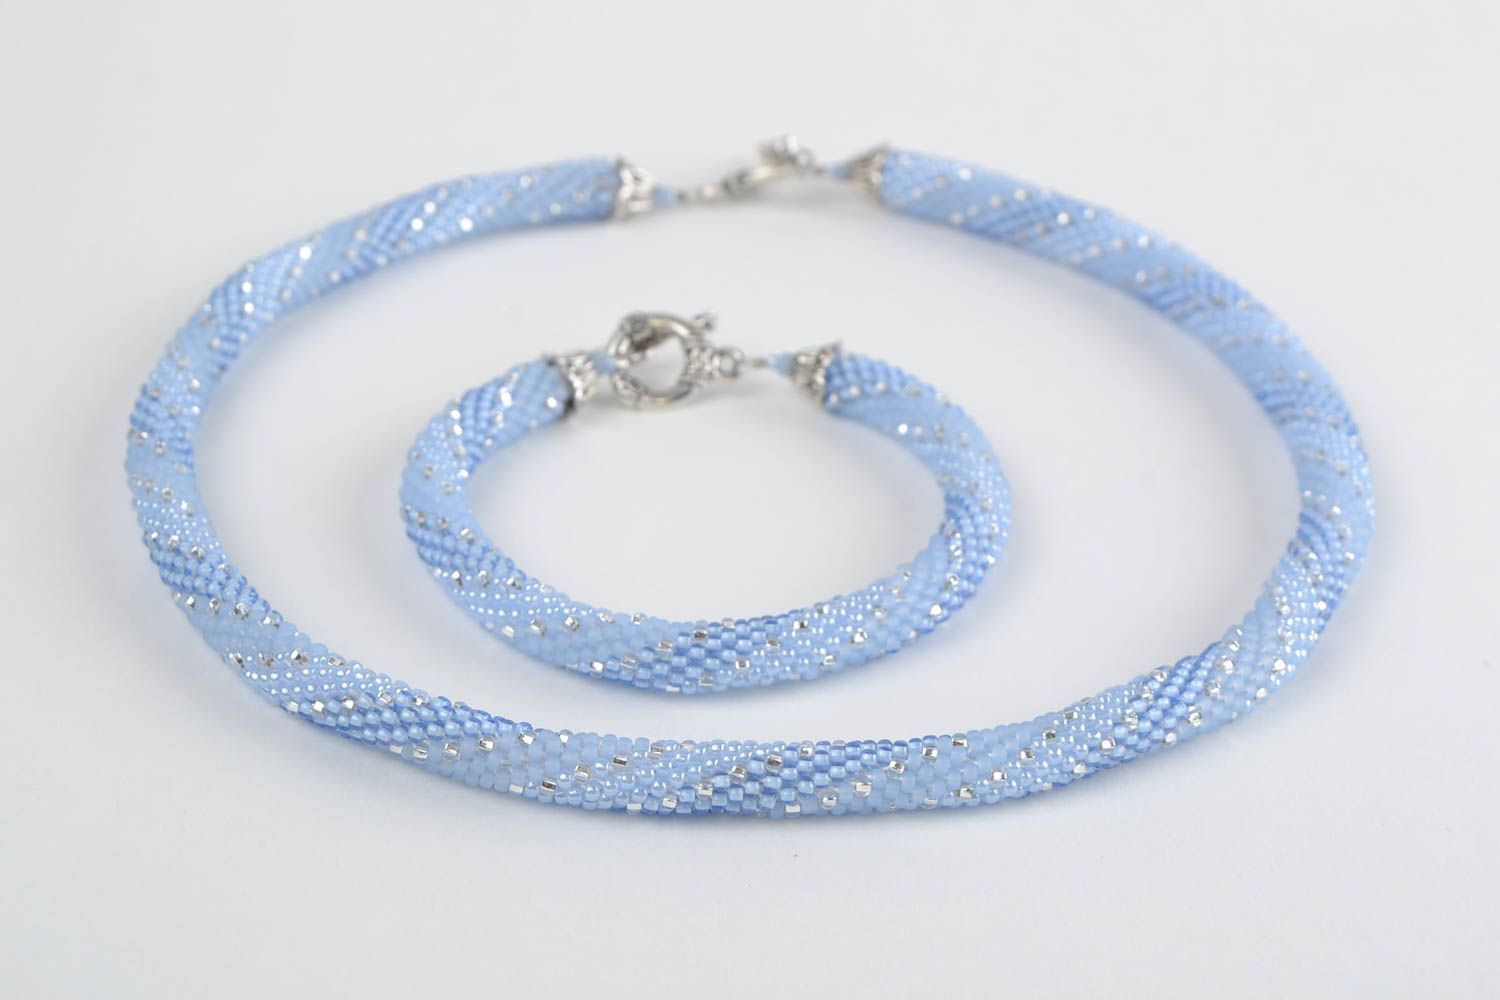 Handmade beaded cord and bracelet in blue color with metal fittings photo 3